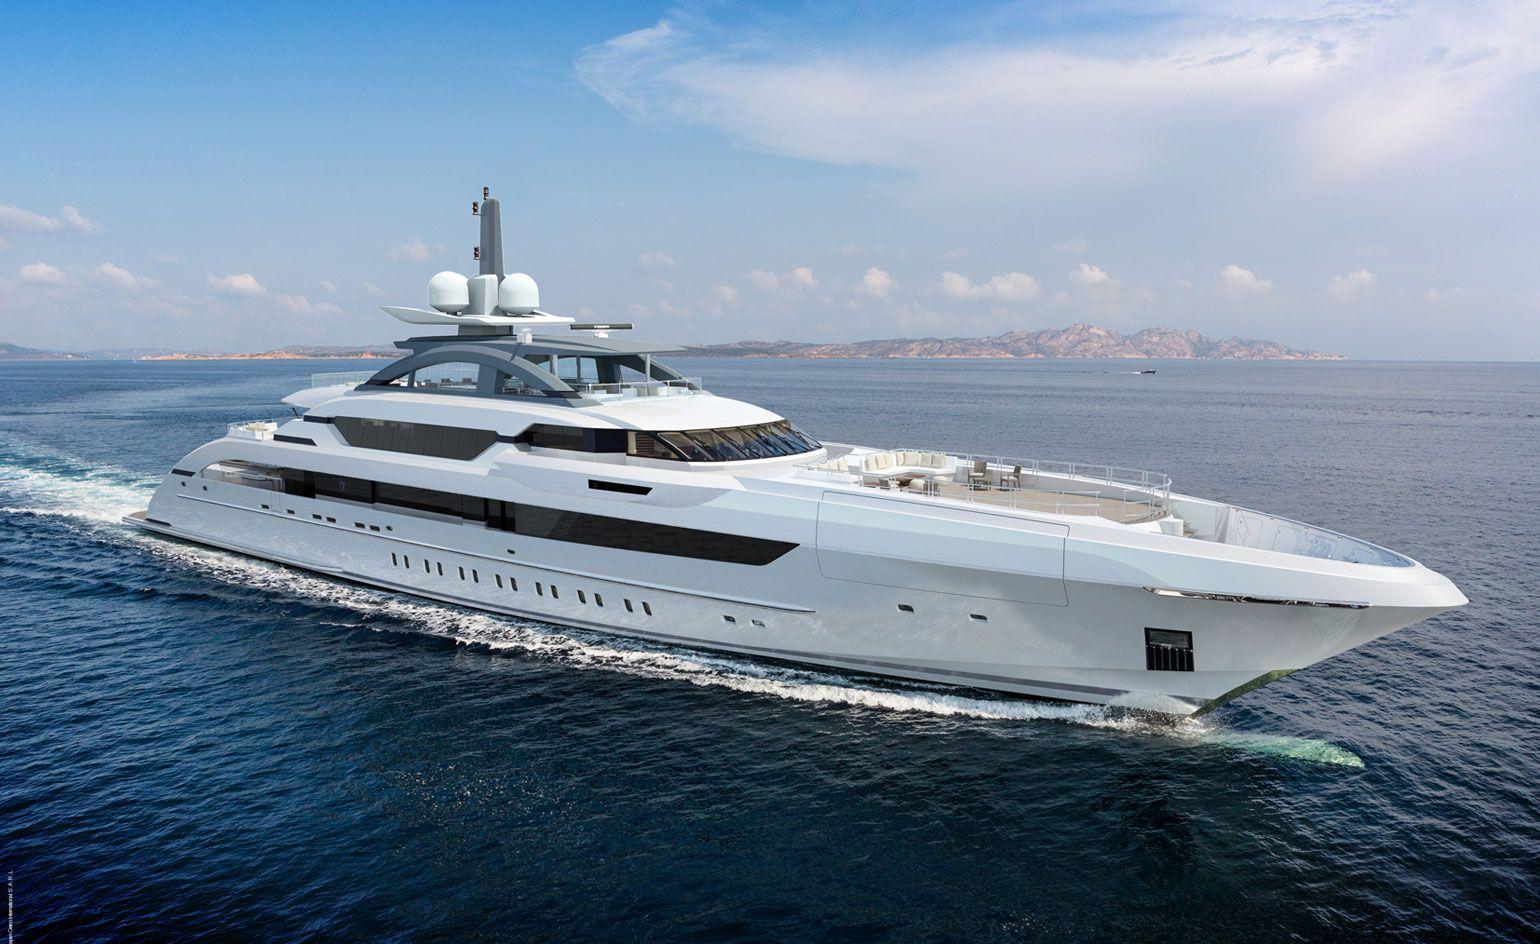 Monaco Yacht Show 2014: the best new boats and concepts. Wallpaper*